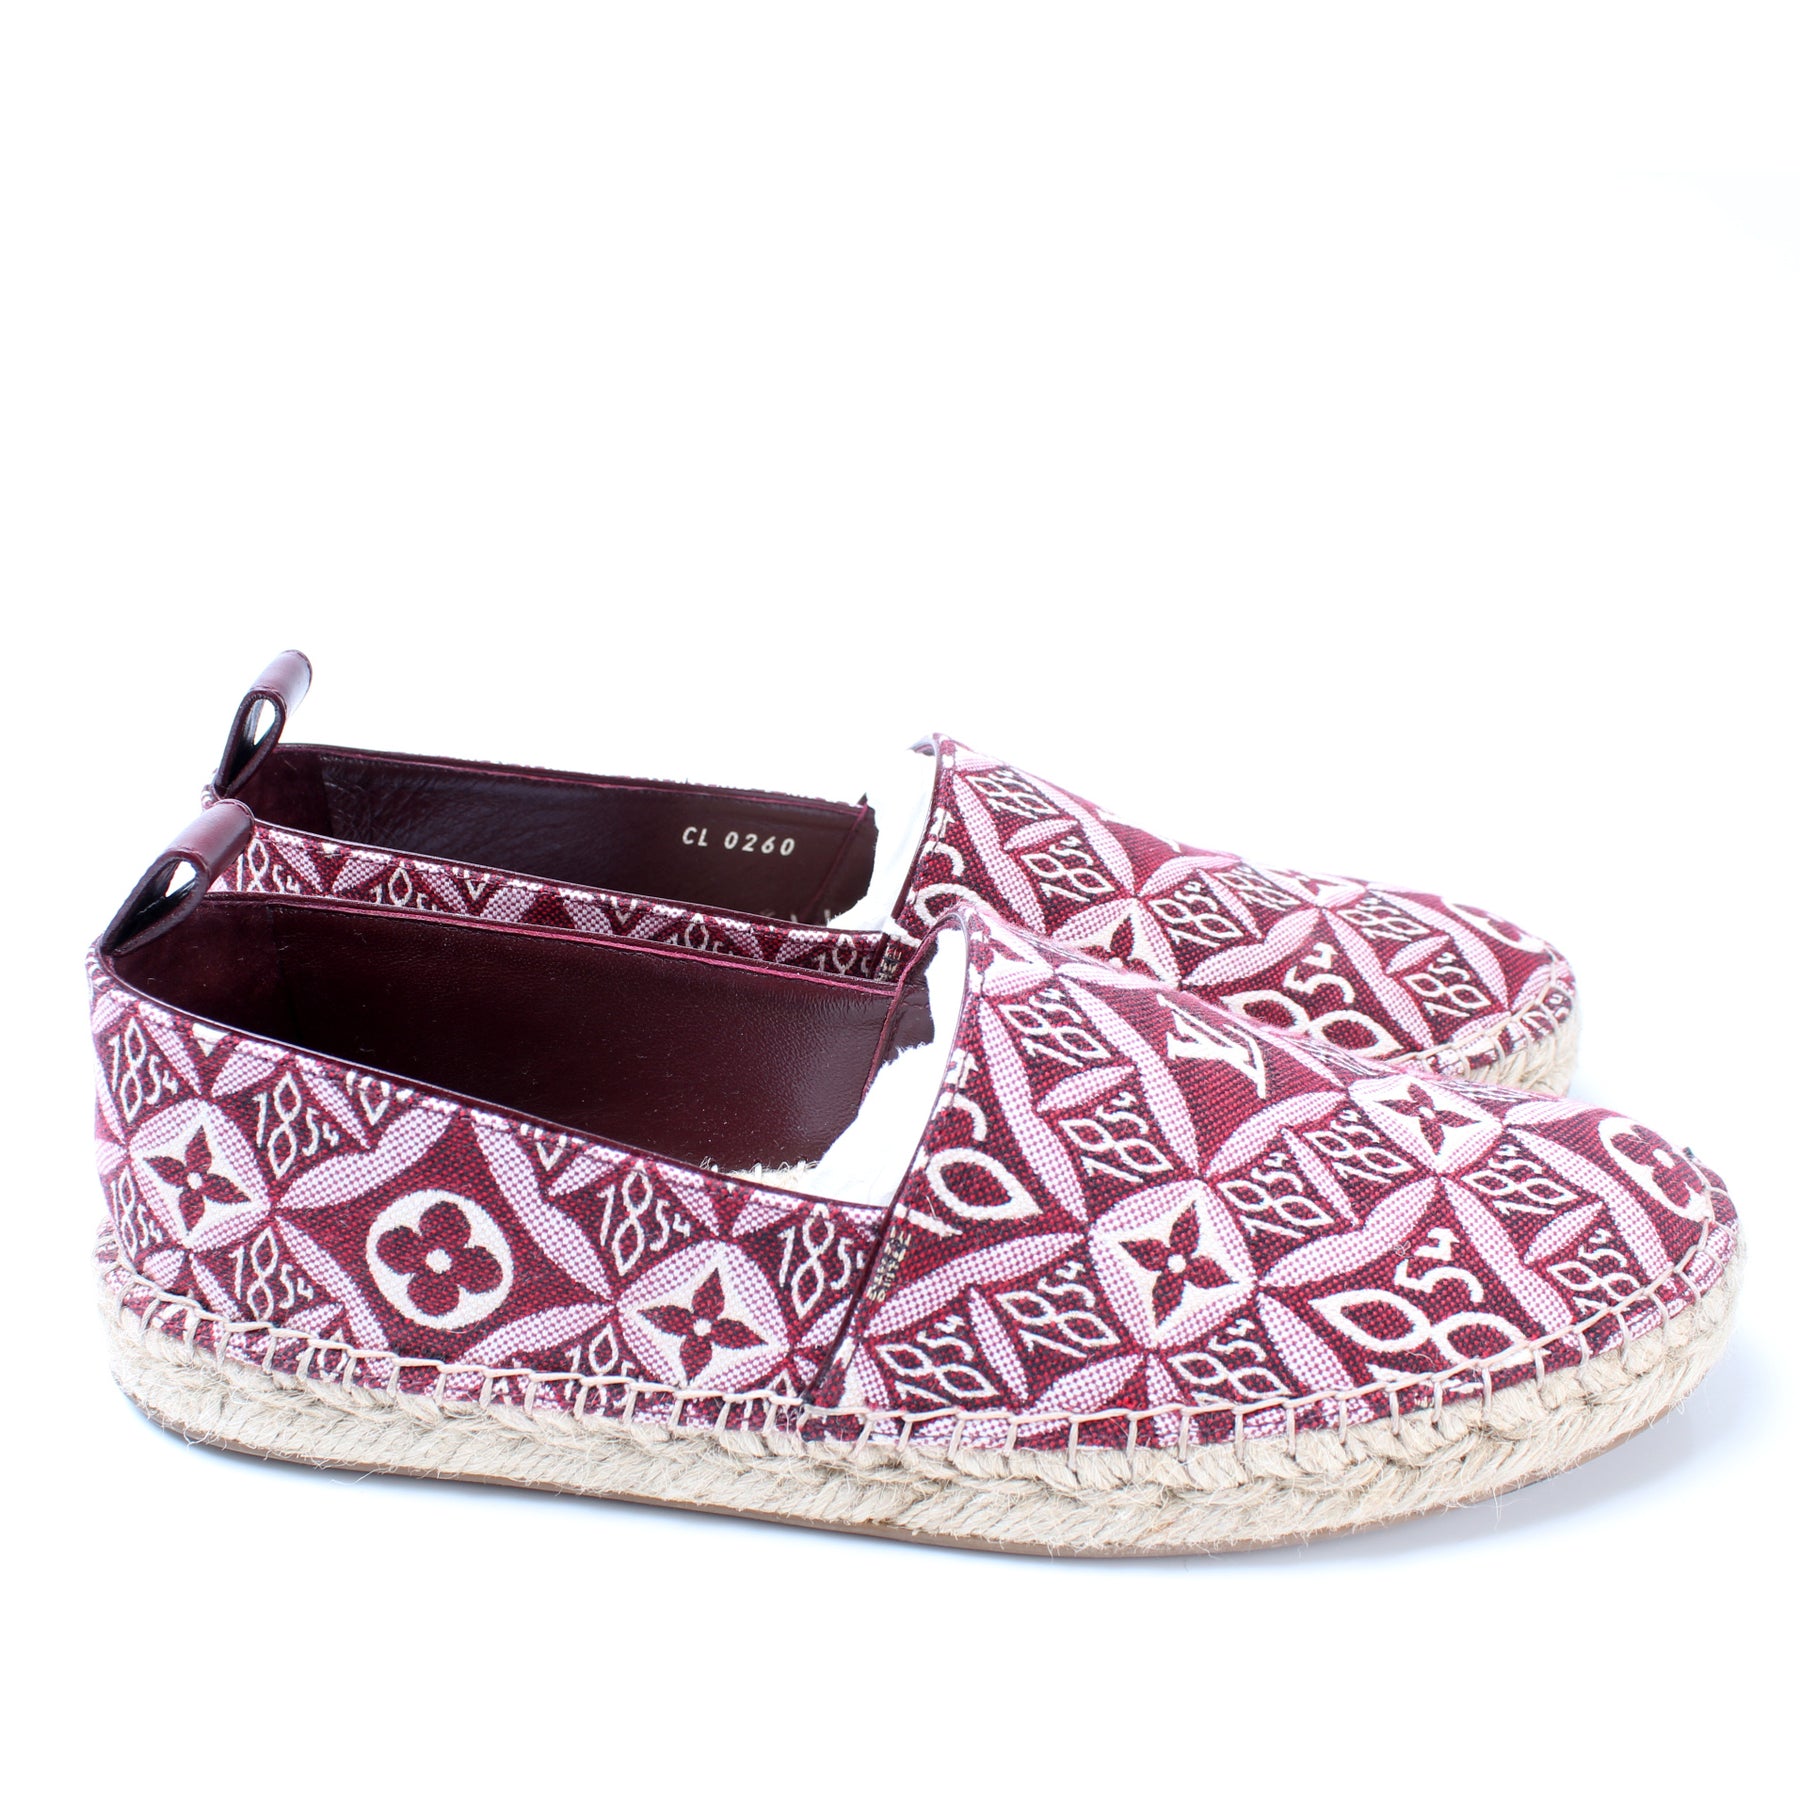 SINCE 1854 STARBOARD FLAT ESPADRILLE 1A8D4N SIZE 39.5– TC